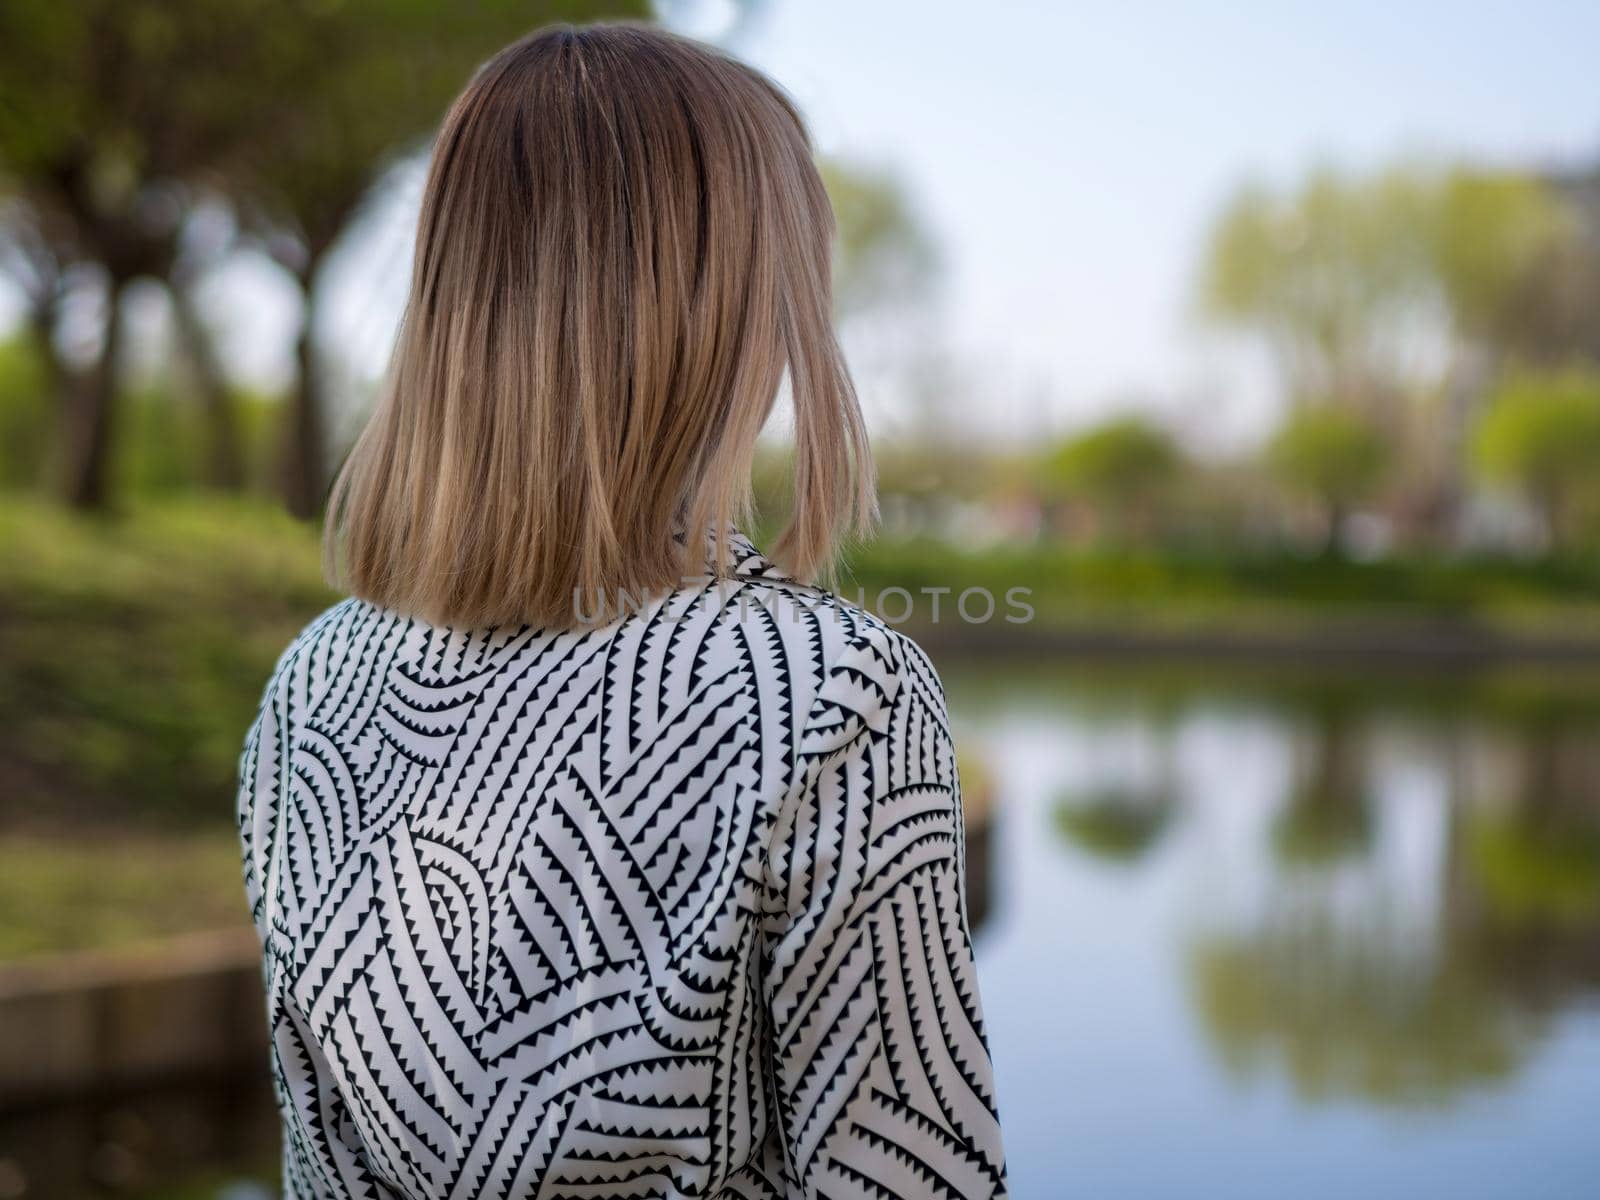 stylish blonde woman in a black and white cloak by the lake in the park